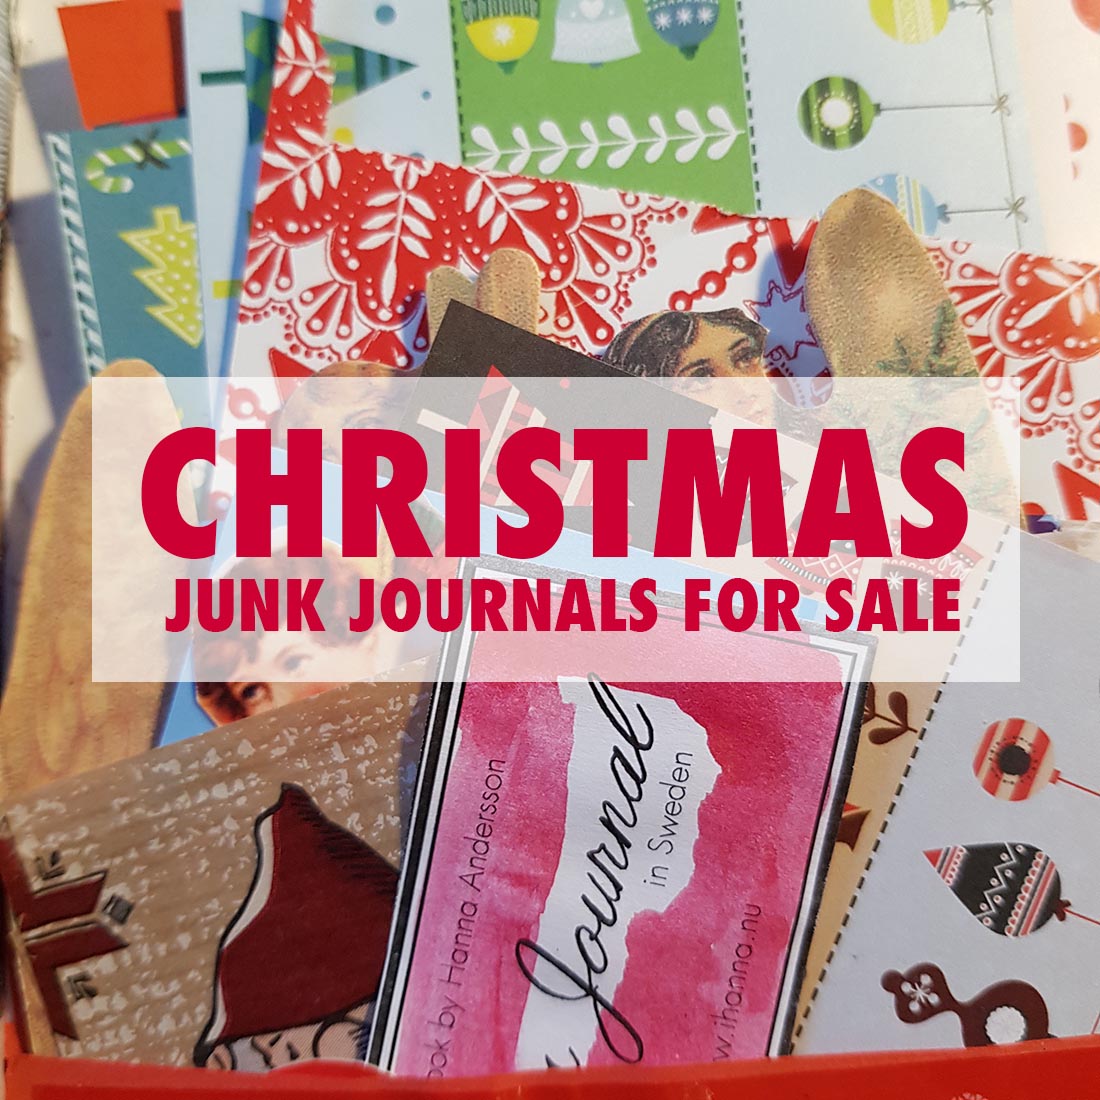 Christmas Junk Journals for sale made by iHanna in Sweden #decemberdaily